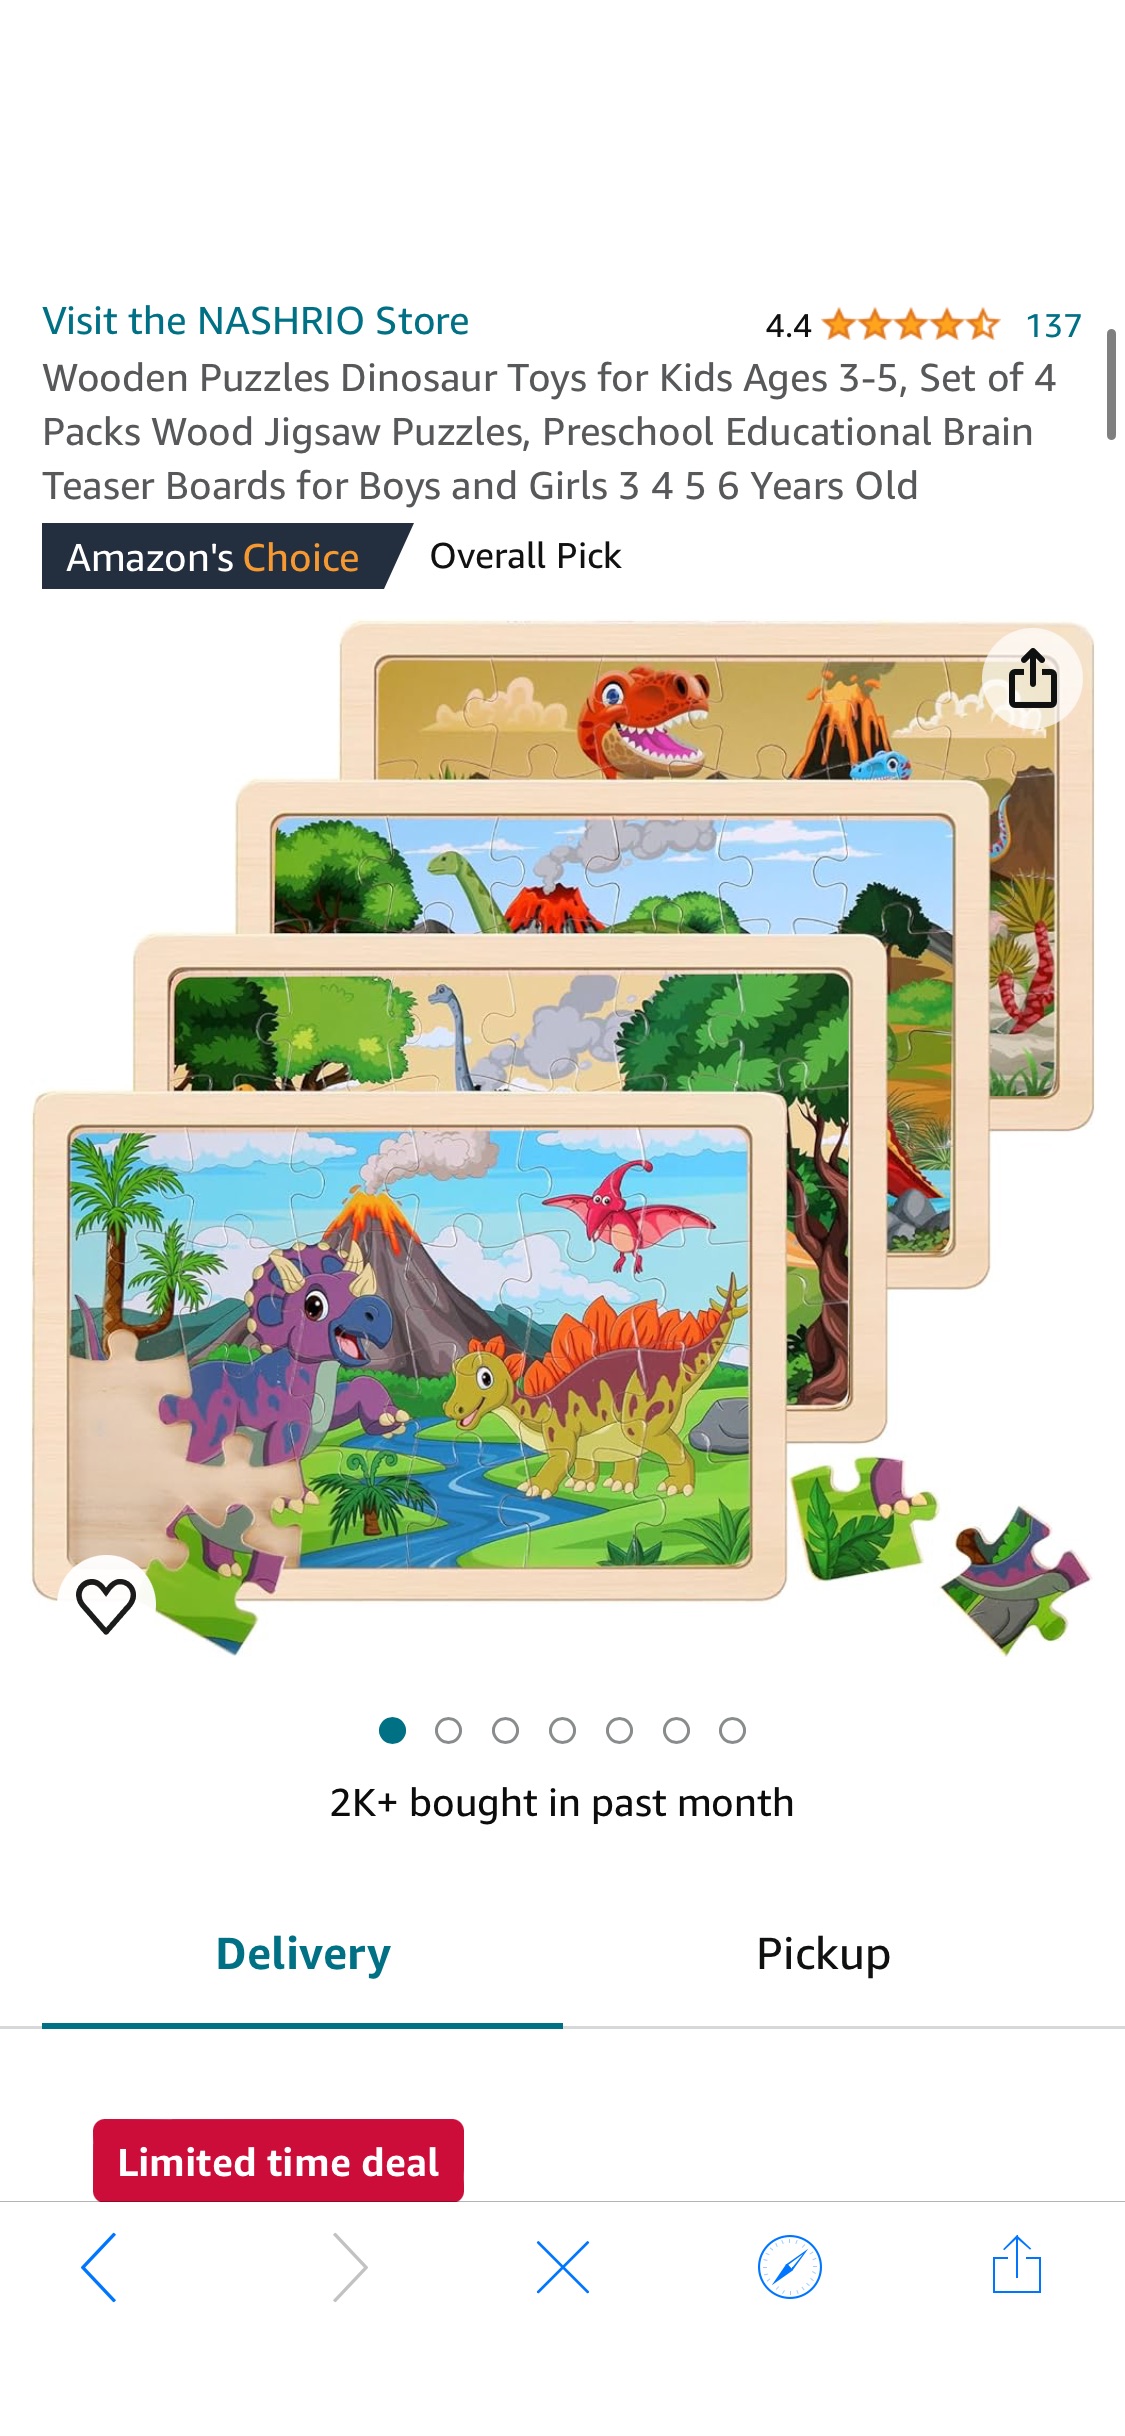 Amazon.com: Wooden Puzzles Dinosaur Toys for Kids Ages 3-5, Set of 4 Packs Wood Jigsaw Puzzles, Preschool Educational Brain Teaser Boards for Boys and Girls 3 4 5 6 Years Old : Toys & Games